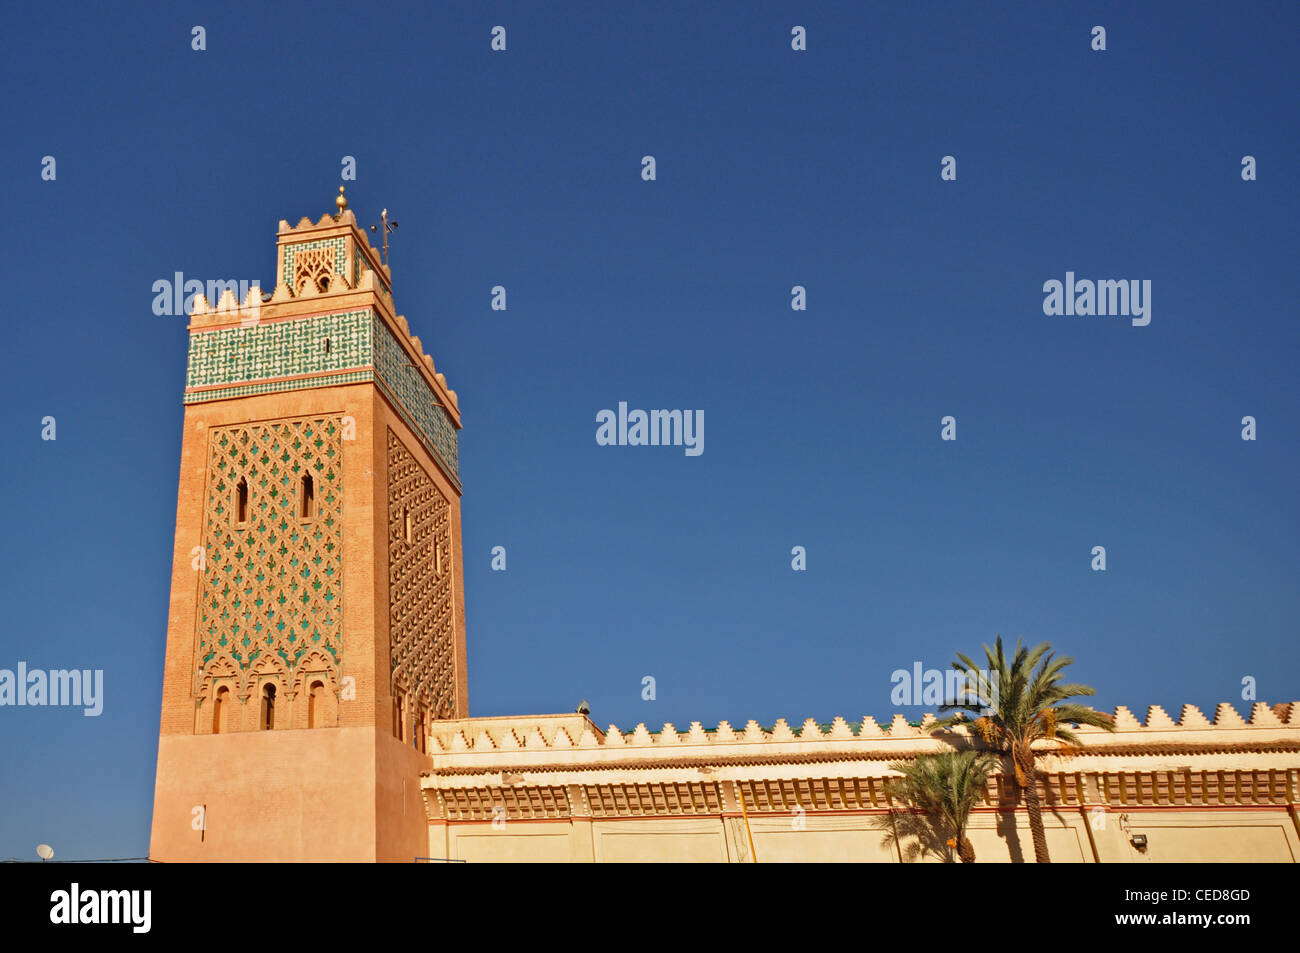 NORTH AFRICA, MOROCCO, Marrakesh, Kasbah Mosque Stock Photo